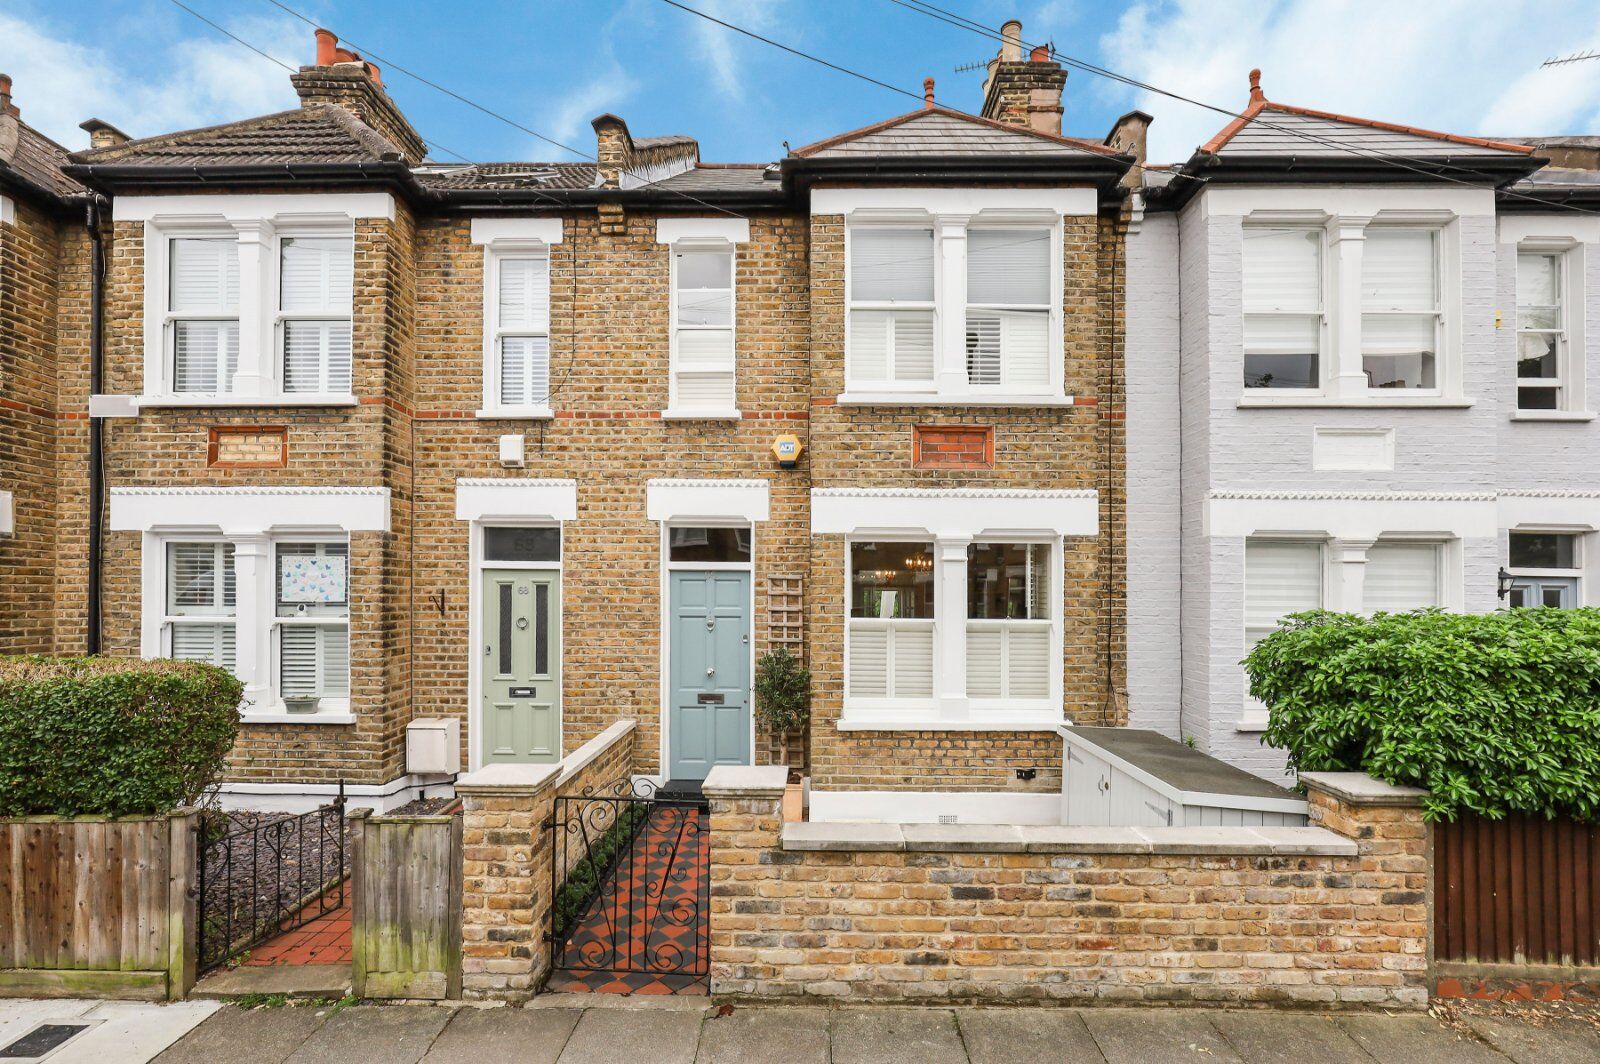 3 bedroom mid terraced house for sale Florence Road, Wimbledon, SW19, main image